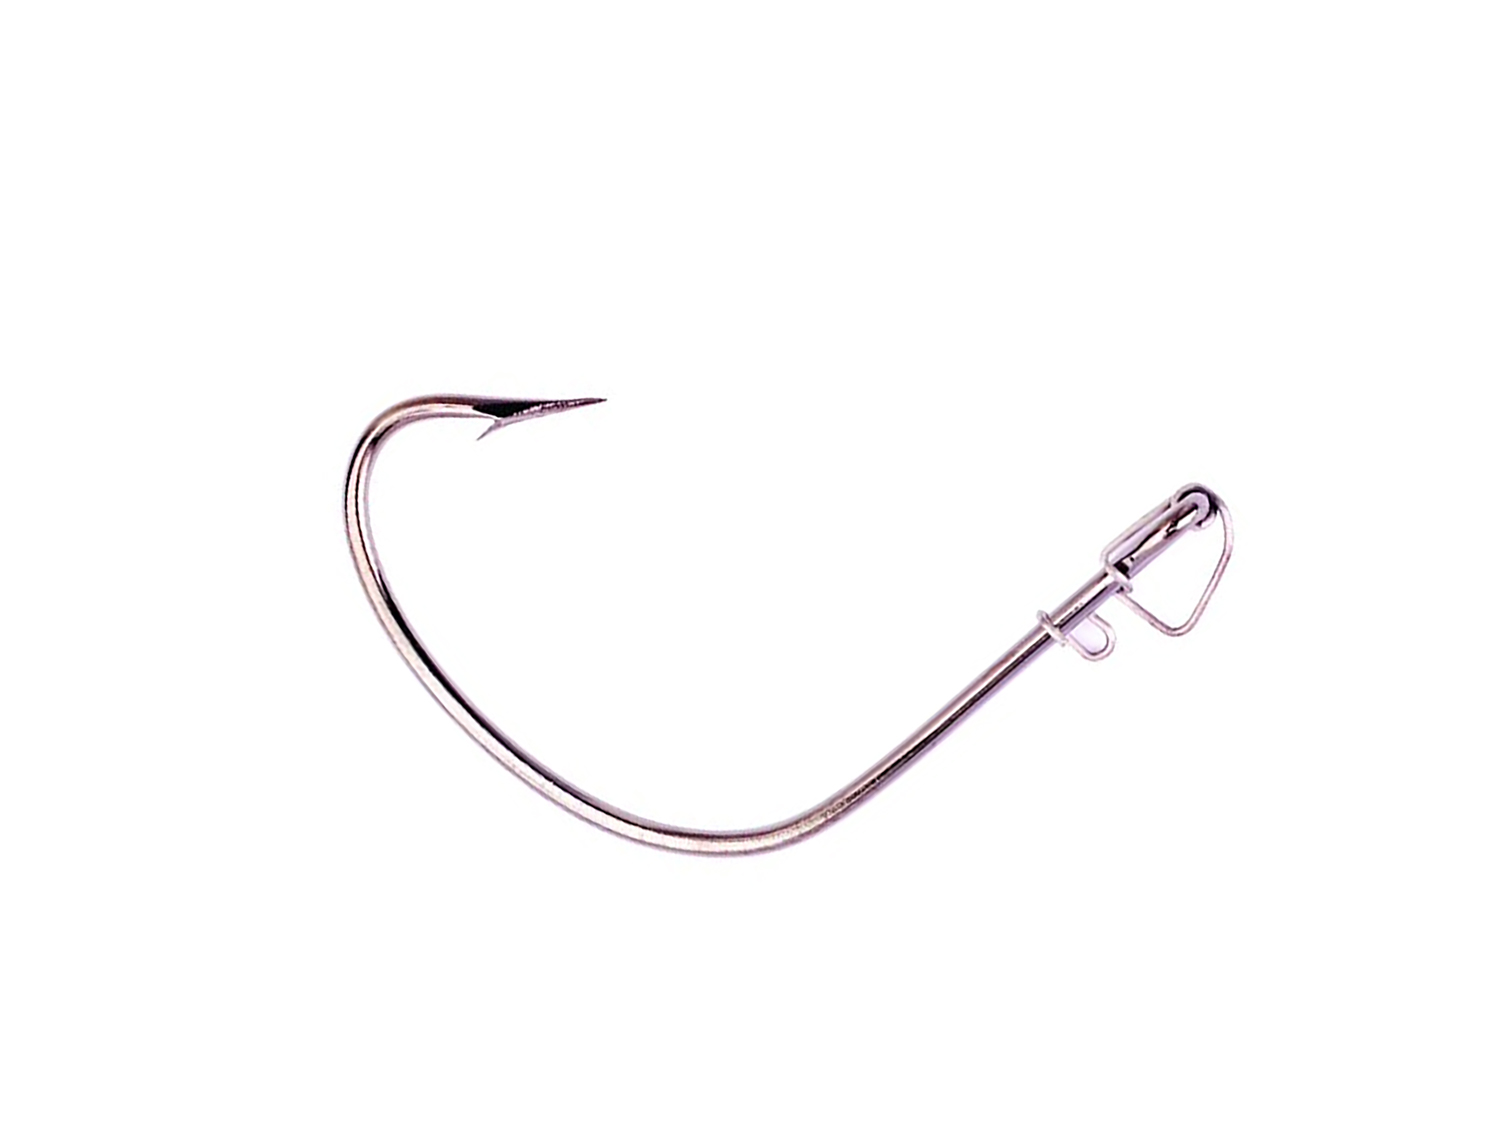 EAGLE CLAW SHAW Grigsby HP Seaguard Hooks, Size 2, #L152G, 16 Total Hooks  (New) $9.99 - PicClick